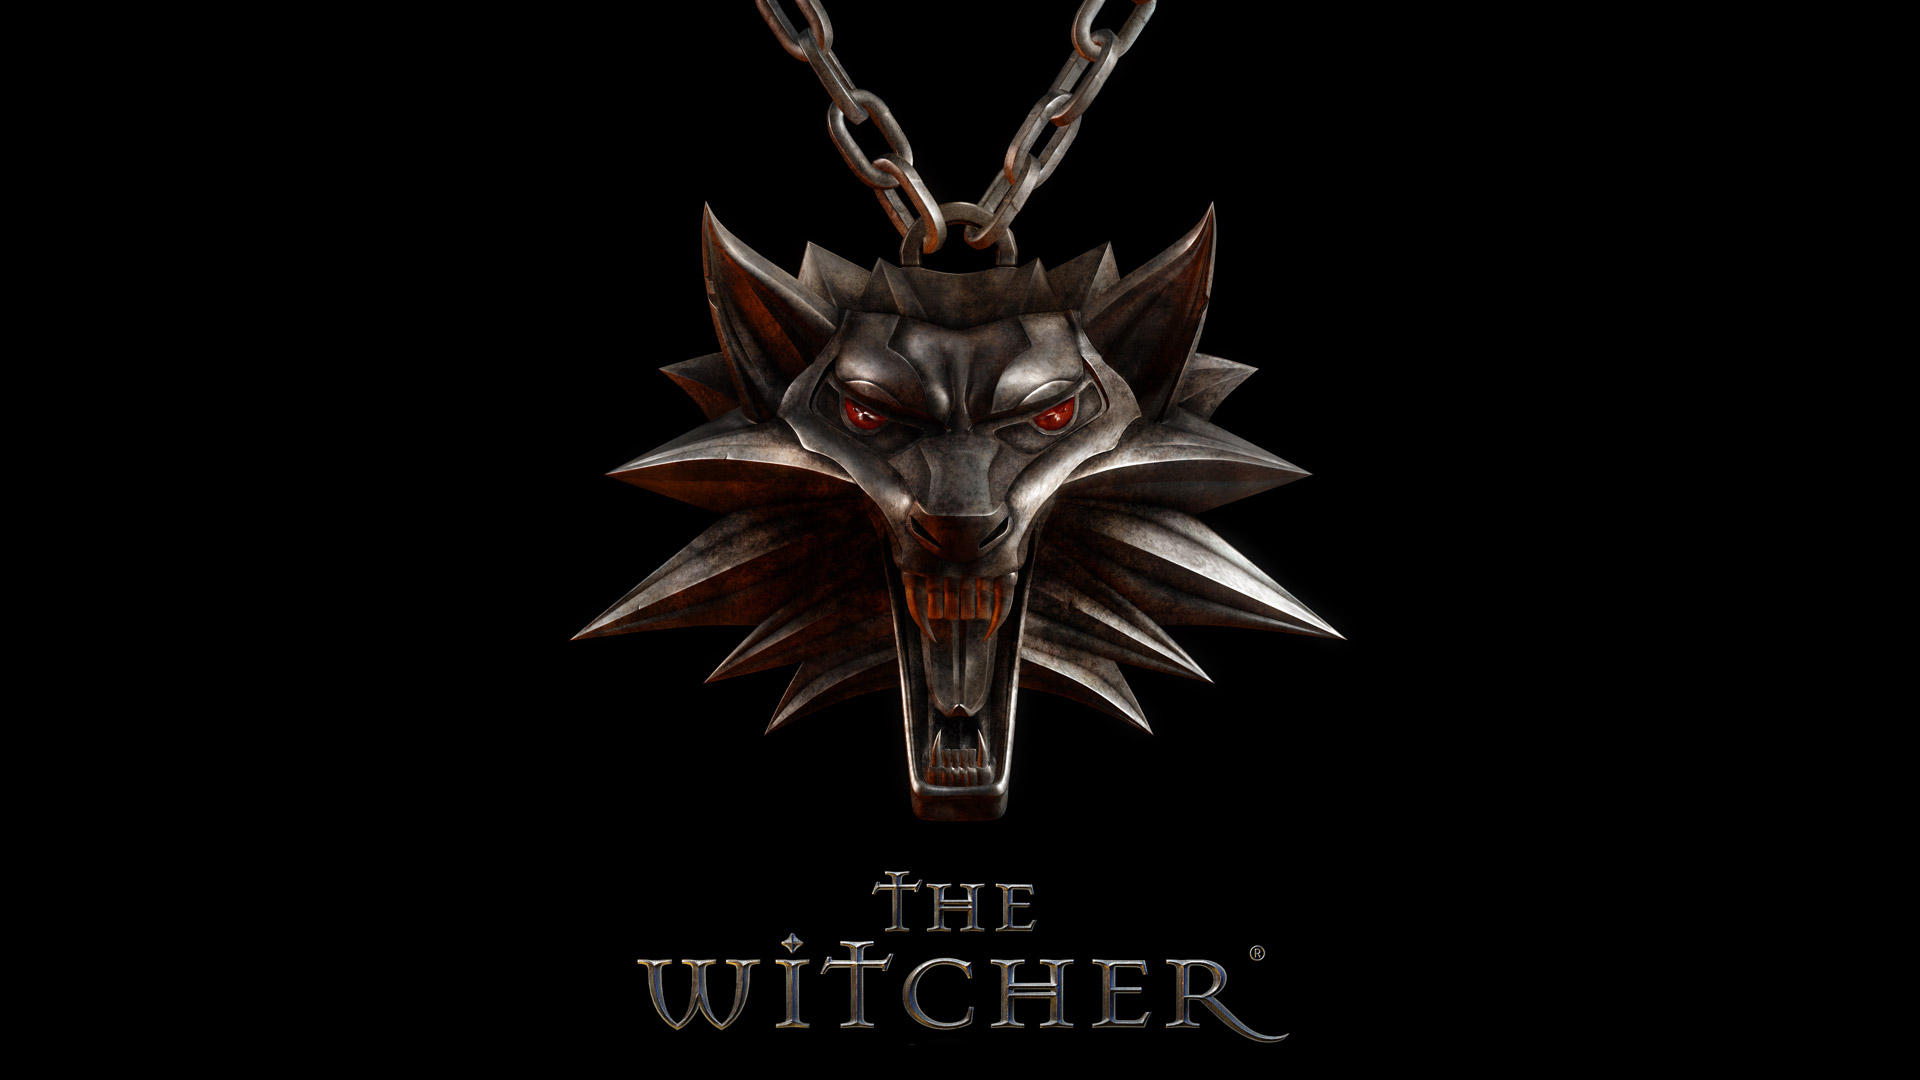 The Witcher Wallpaper In